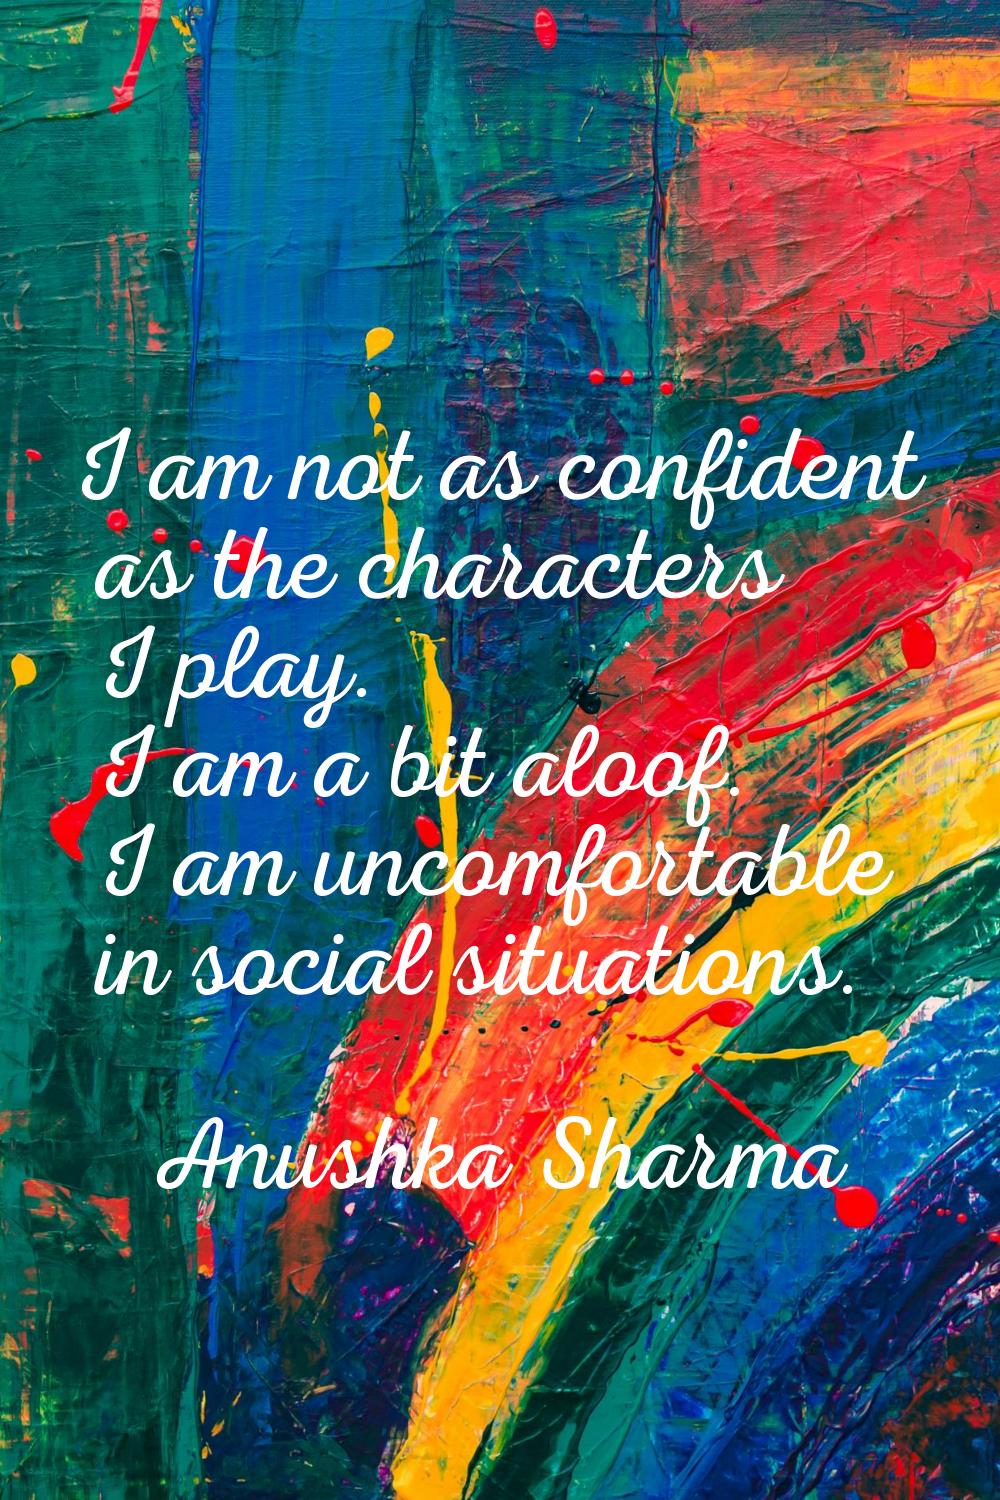 I am not as confident as the characters I play. I am a bit aloof. I am uncomfortable in social situ